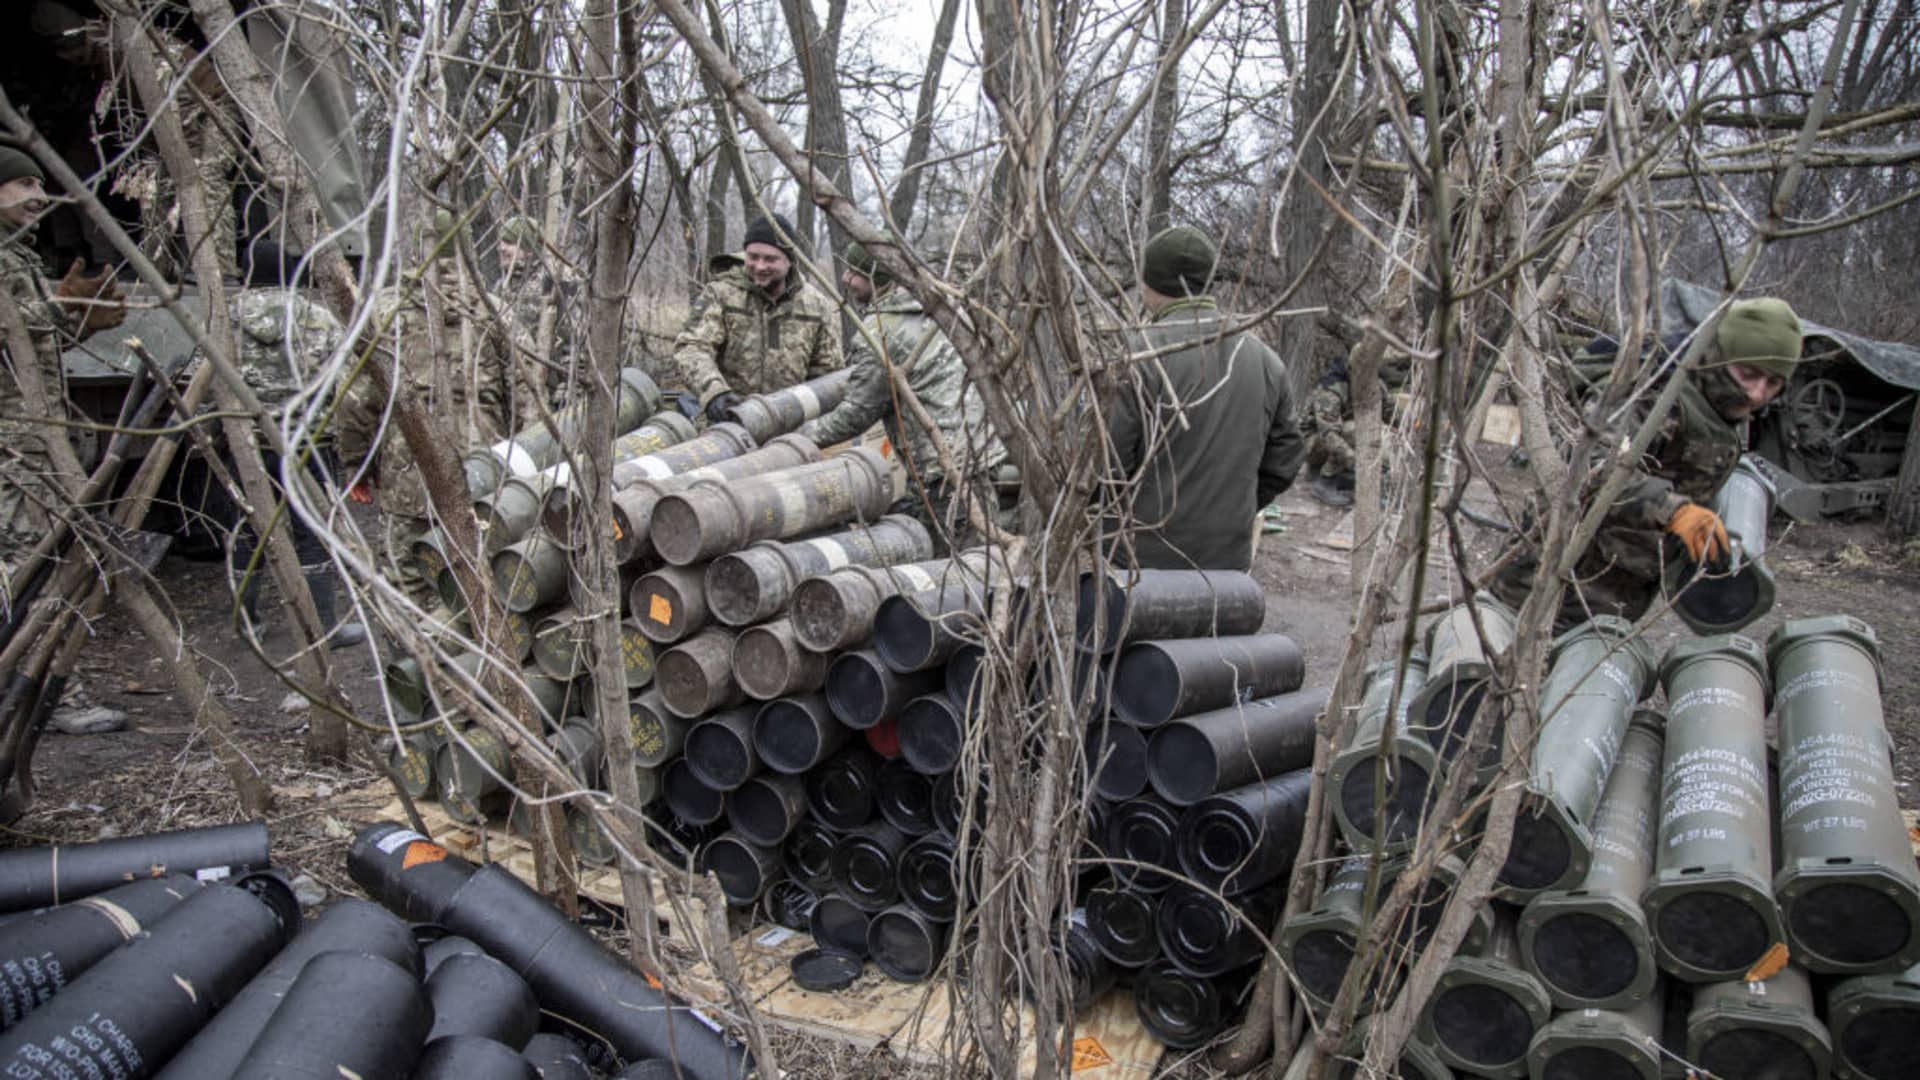 Ukrainian servicemen of the artillery unit unload rounds of ammunition in a position nearby Bakhmut as the Russia-Ukraine war continues in Chasiv Yar, Ukraine on March 18, 2023. 